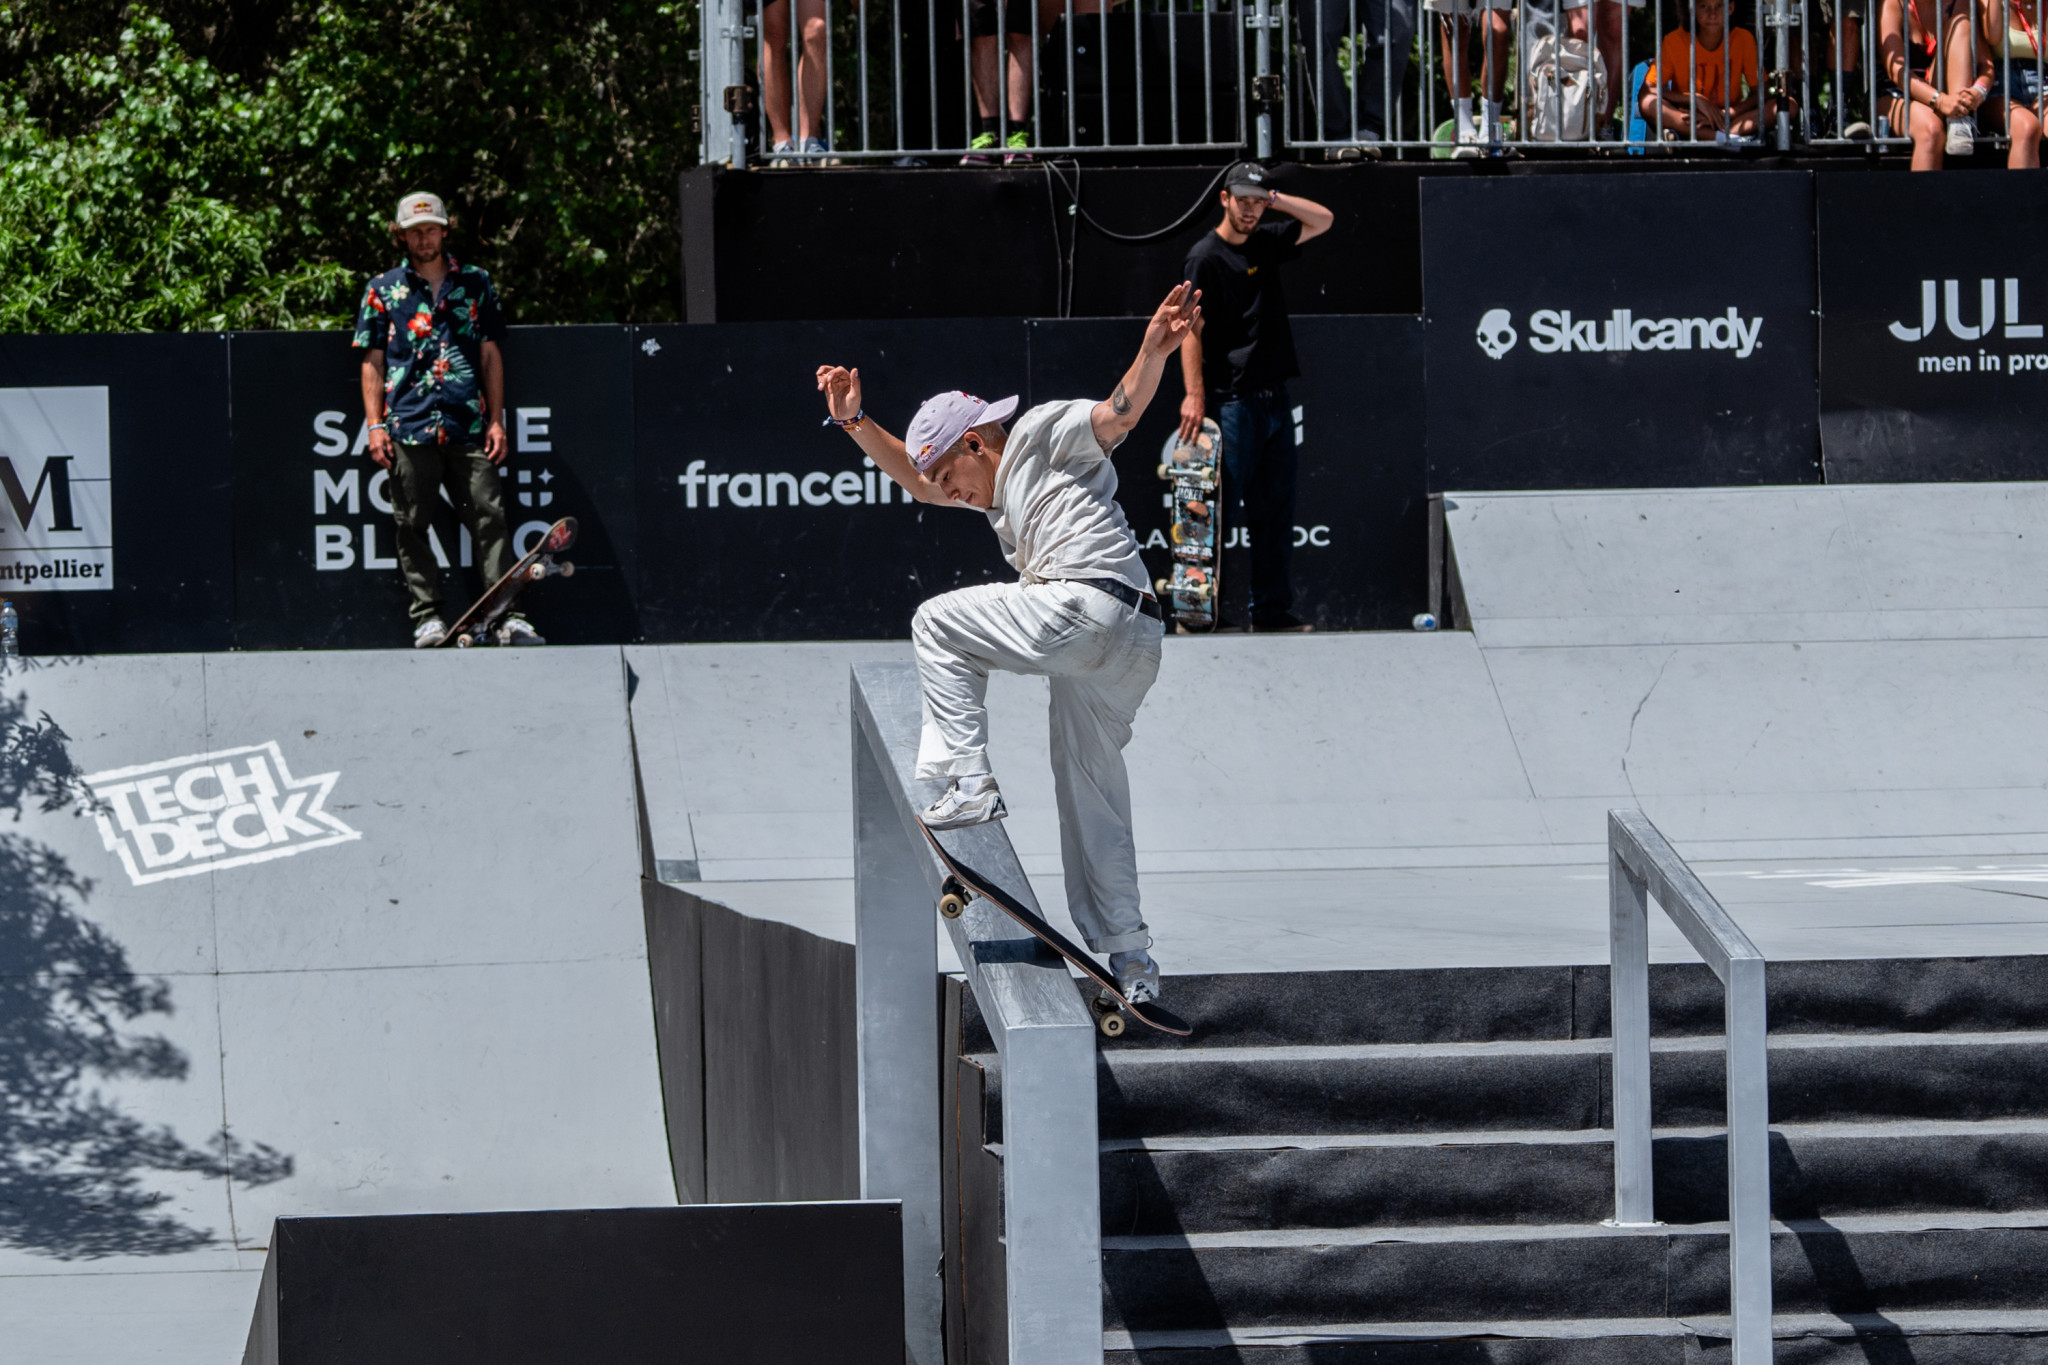 Peru's Angelo Caro led the scoring in the men's street skateboard semi-final with 46.99 points ©Hurricane - FISE